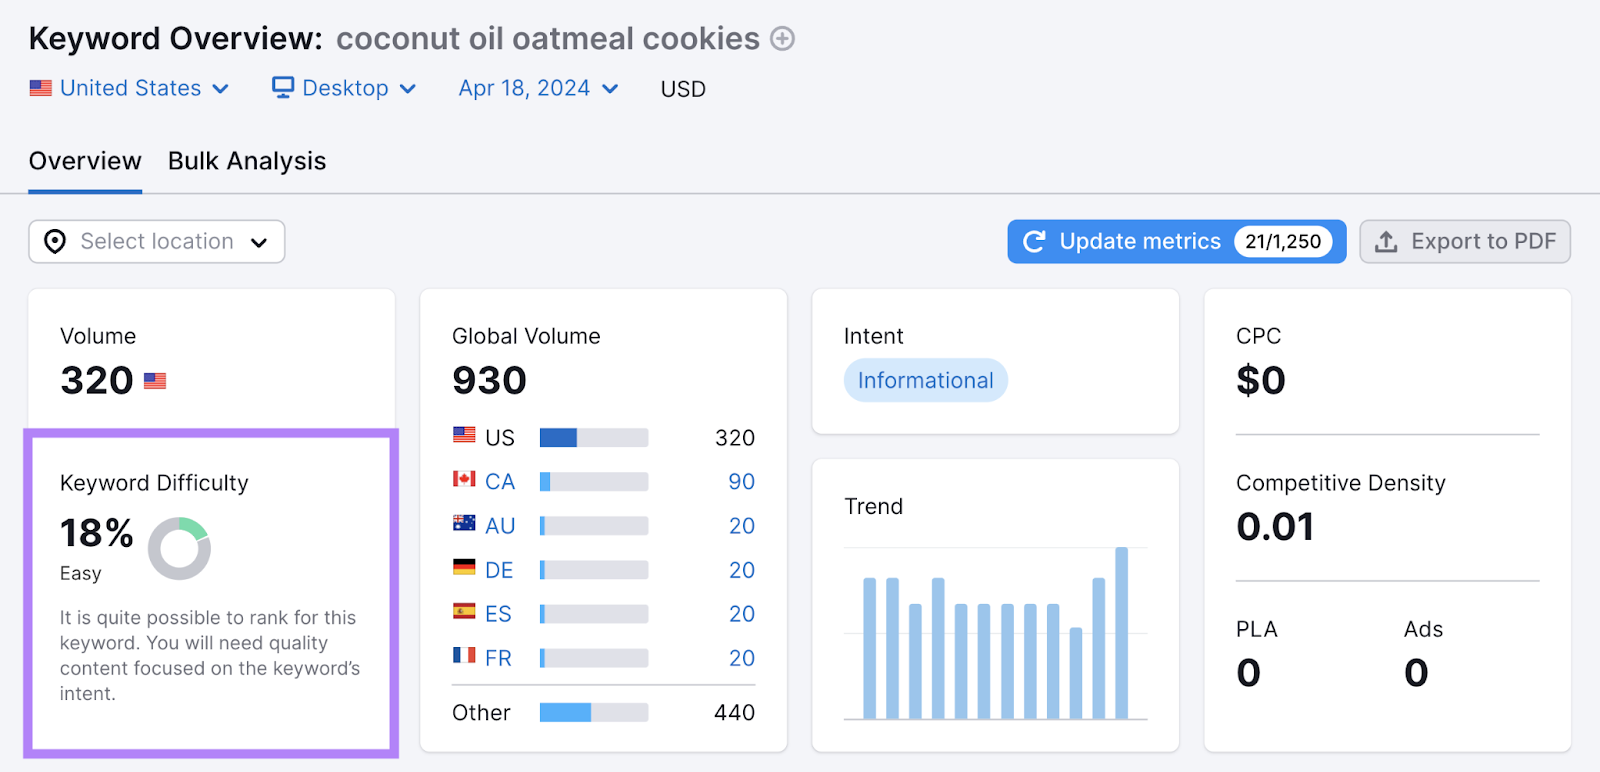 Search for "coconut oil oatmeal cookies" shows 18% keyword difficulty in Keyword Overview tool